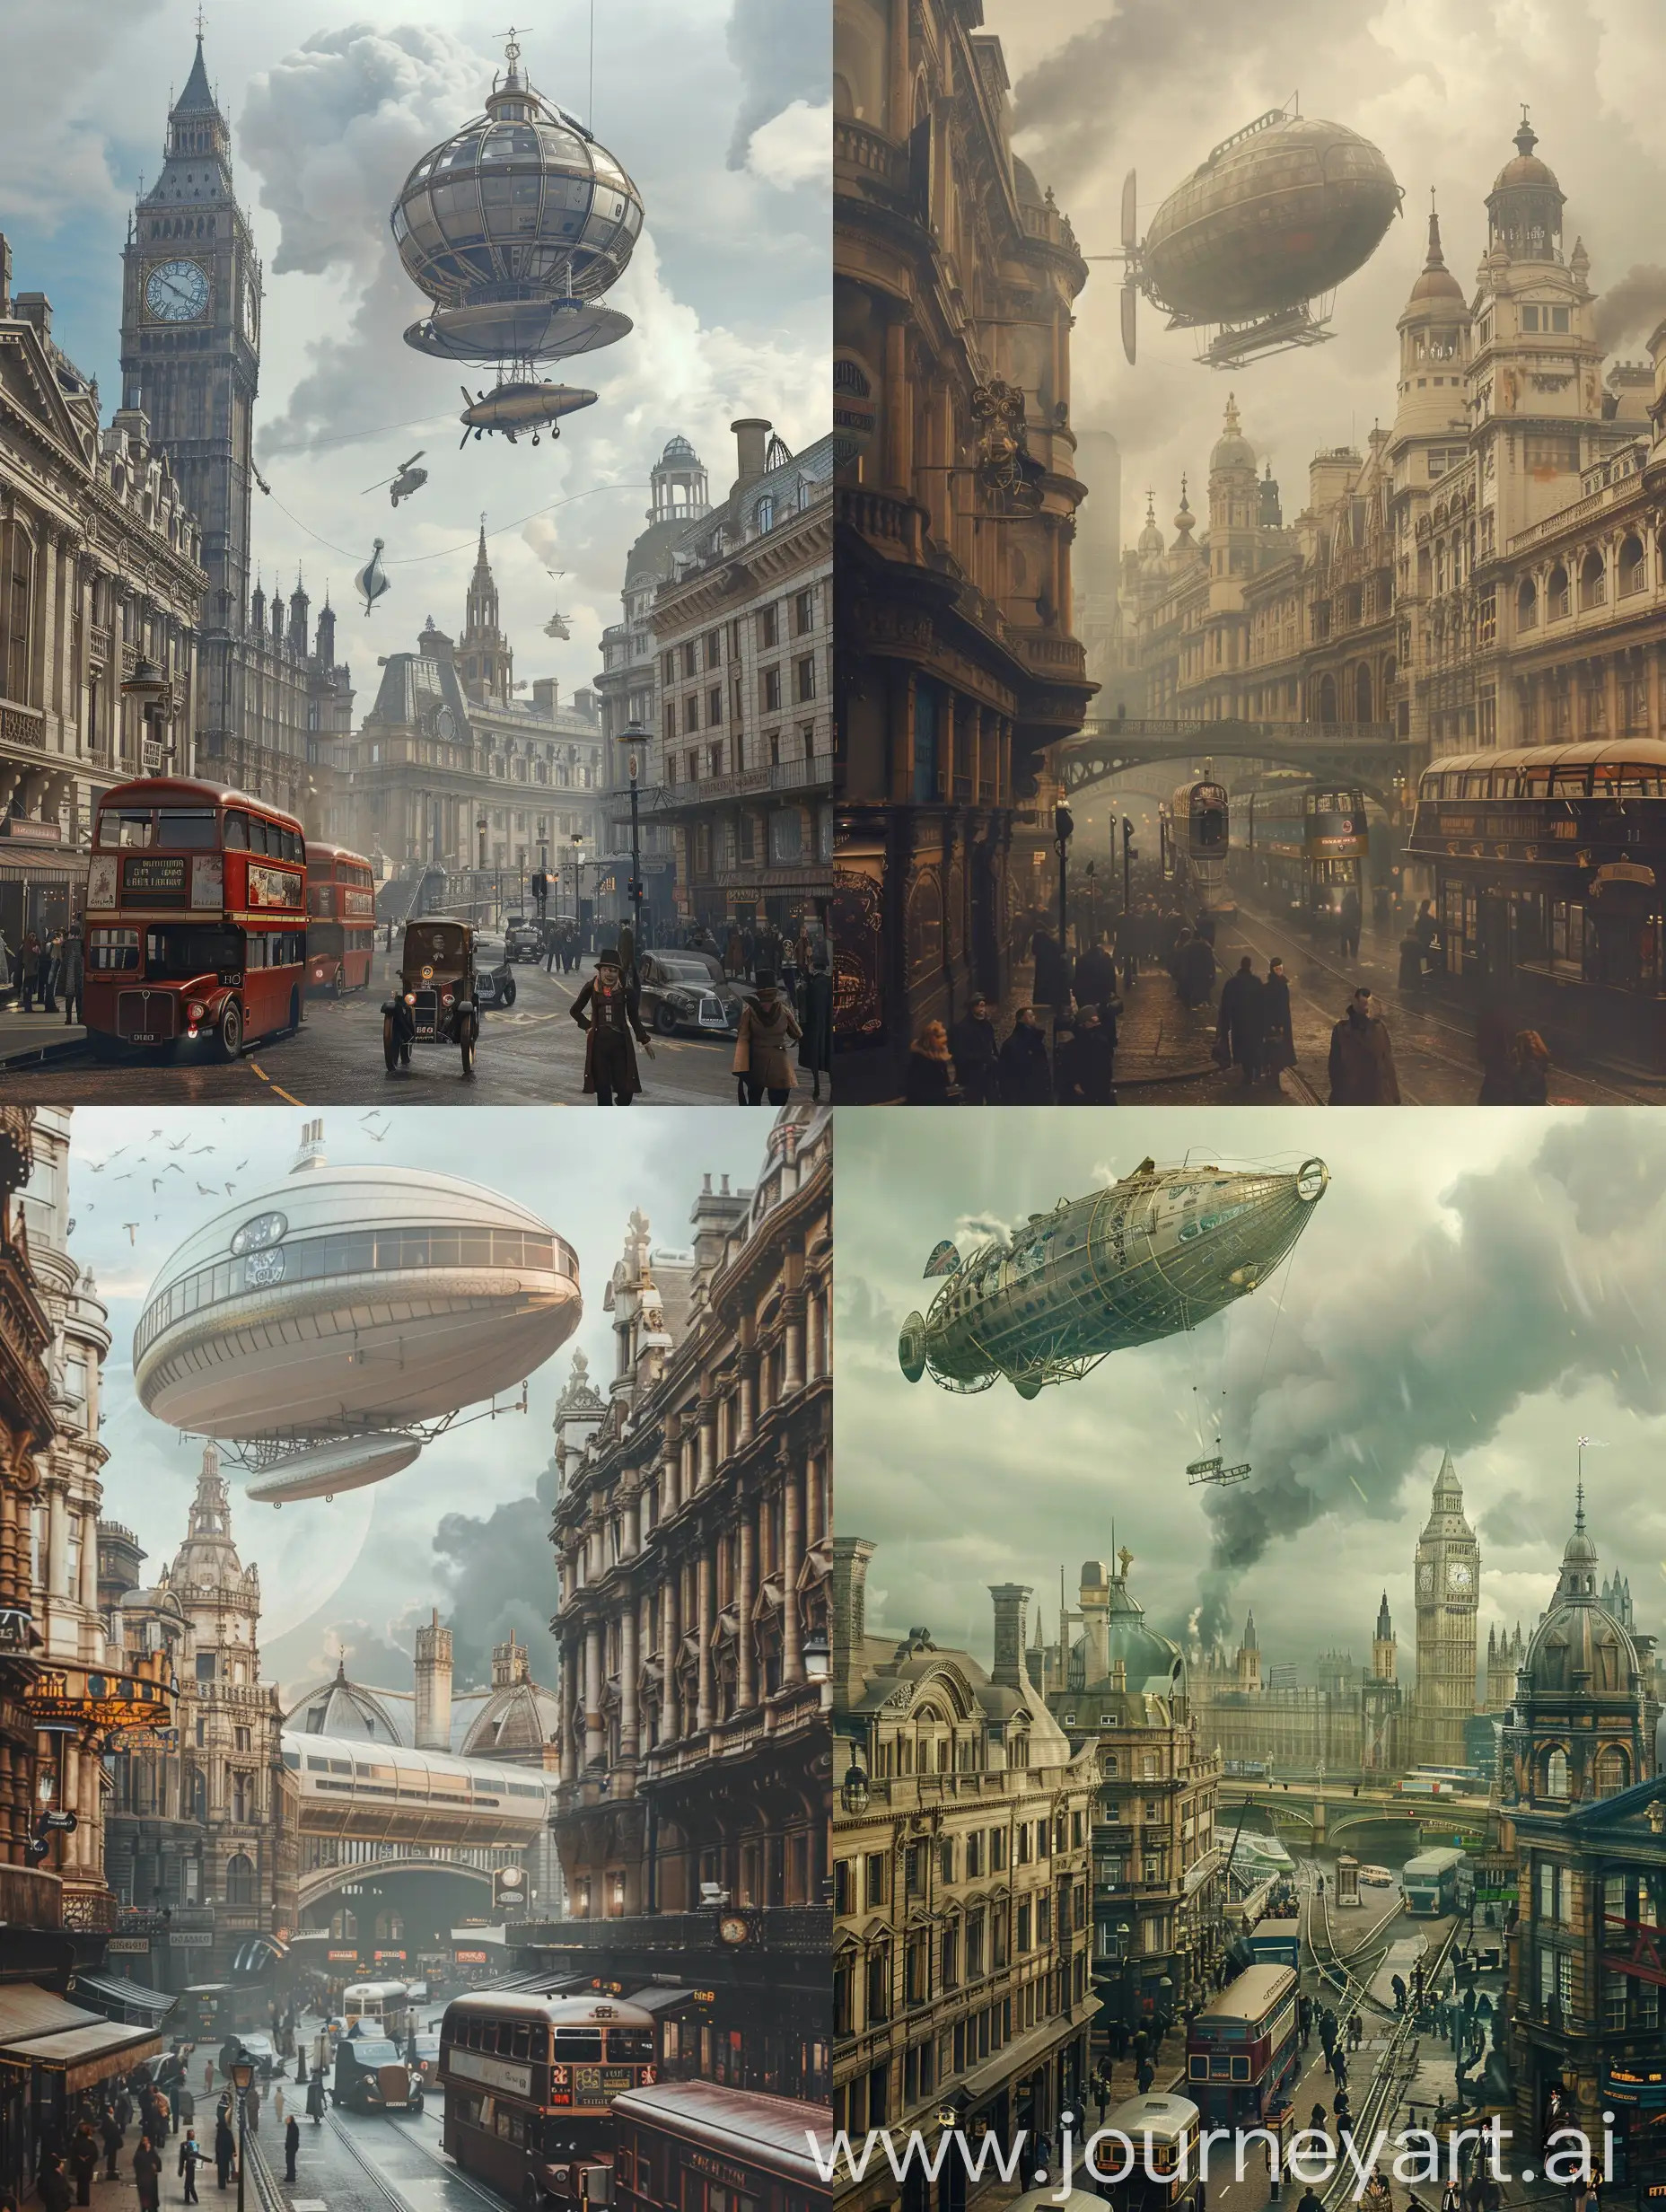 A photo of the streets of Steampunk London. In the background is a railway station. In the air is an airship.